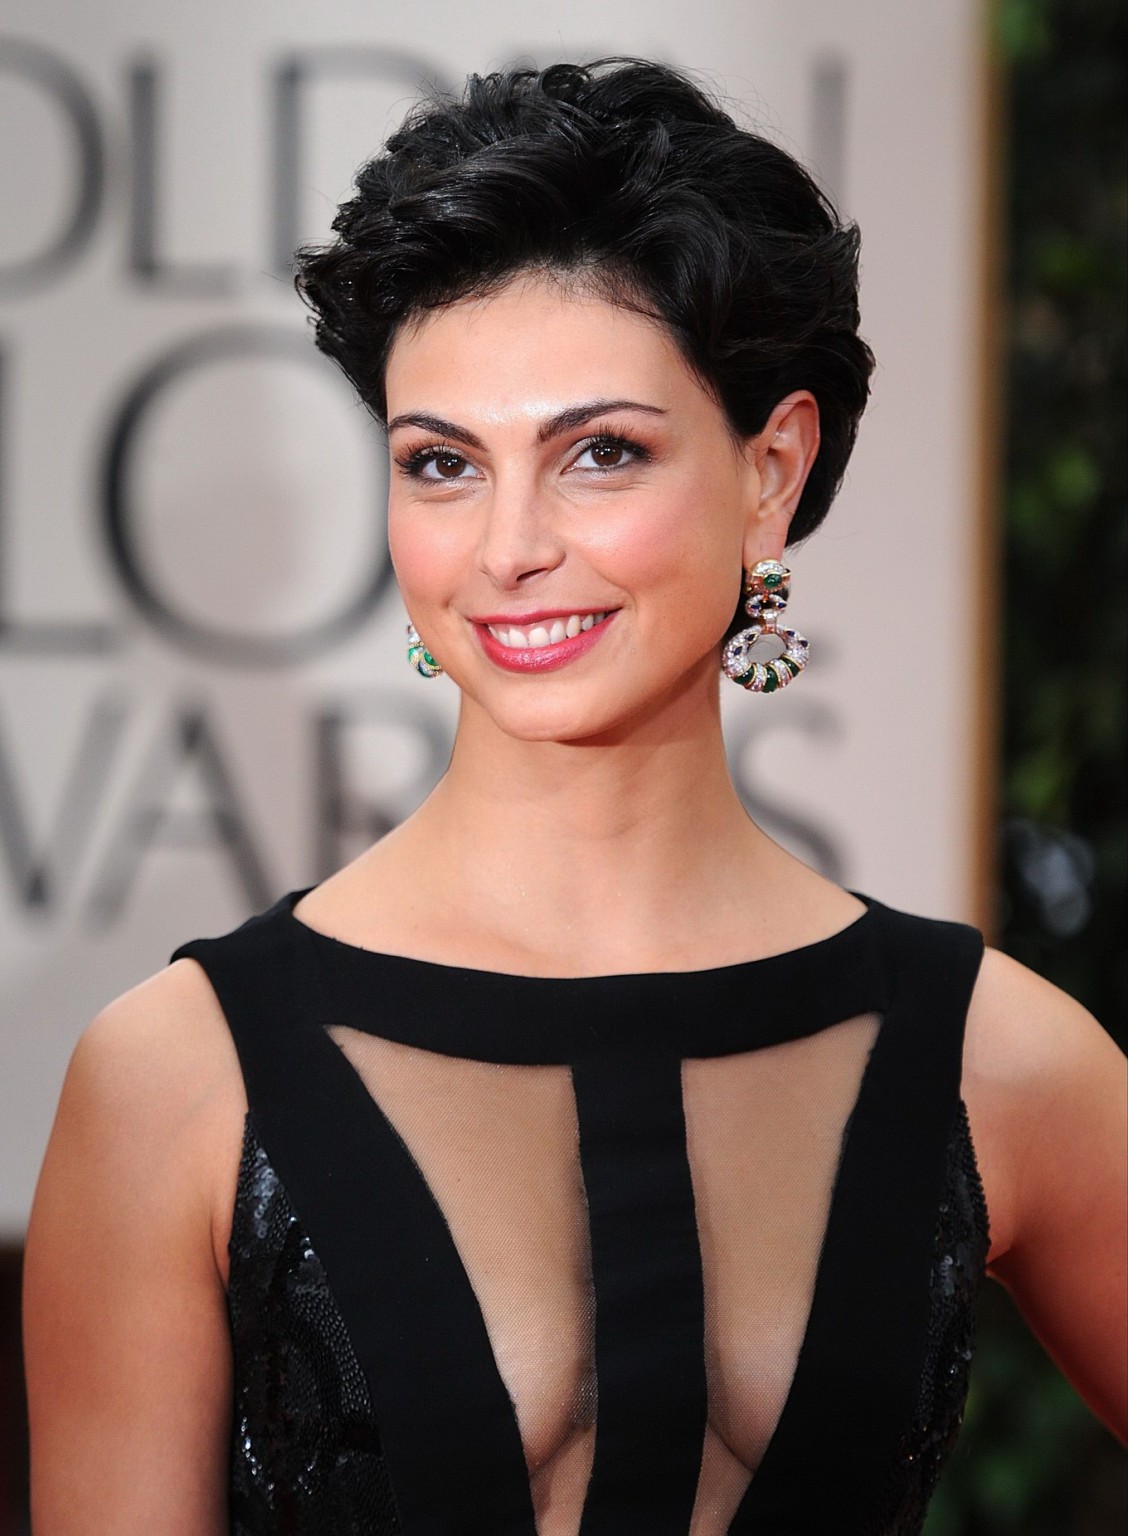 Morena Baccarin braless wearing sexy black dress at the Golden Globes 2012 #75276447